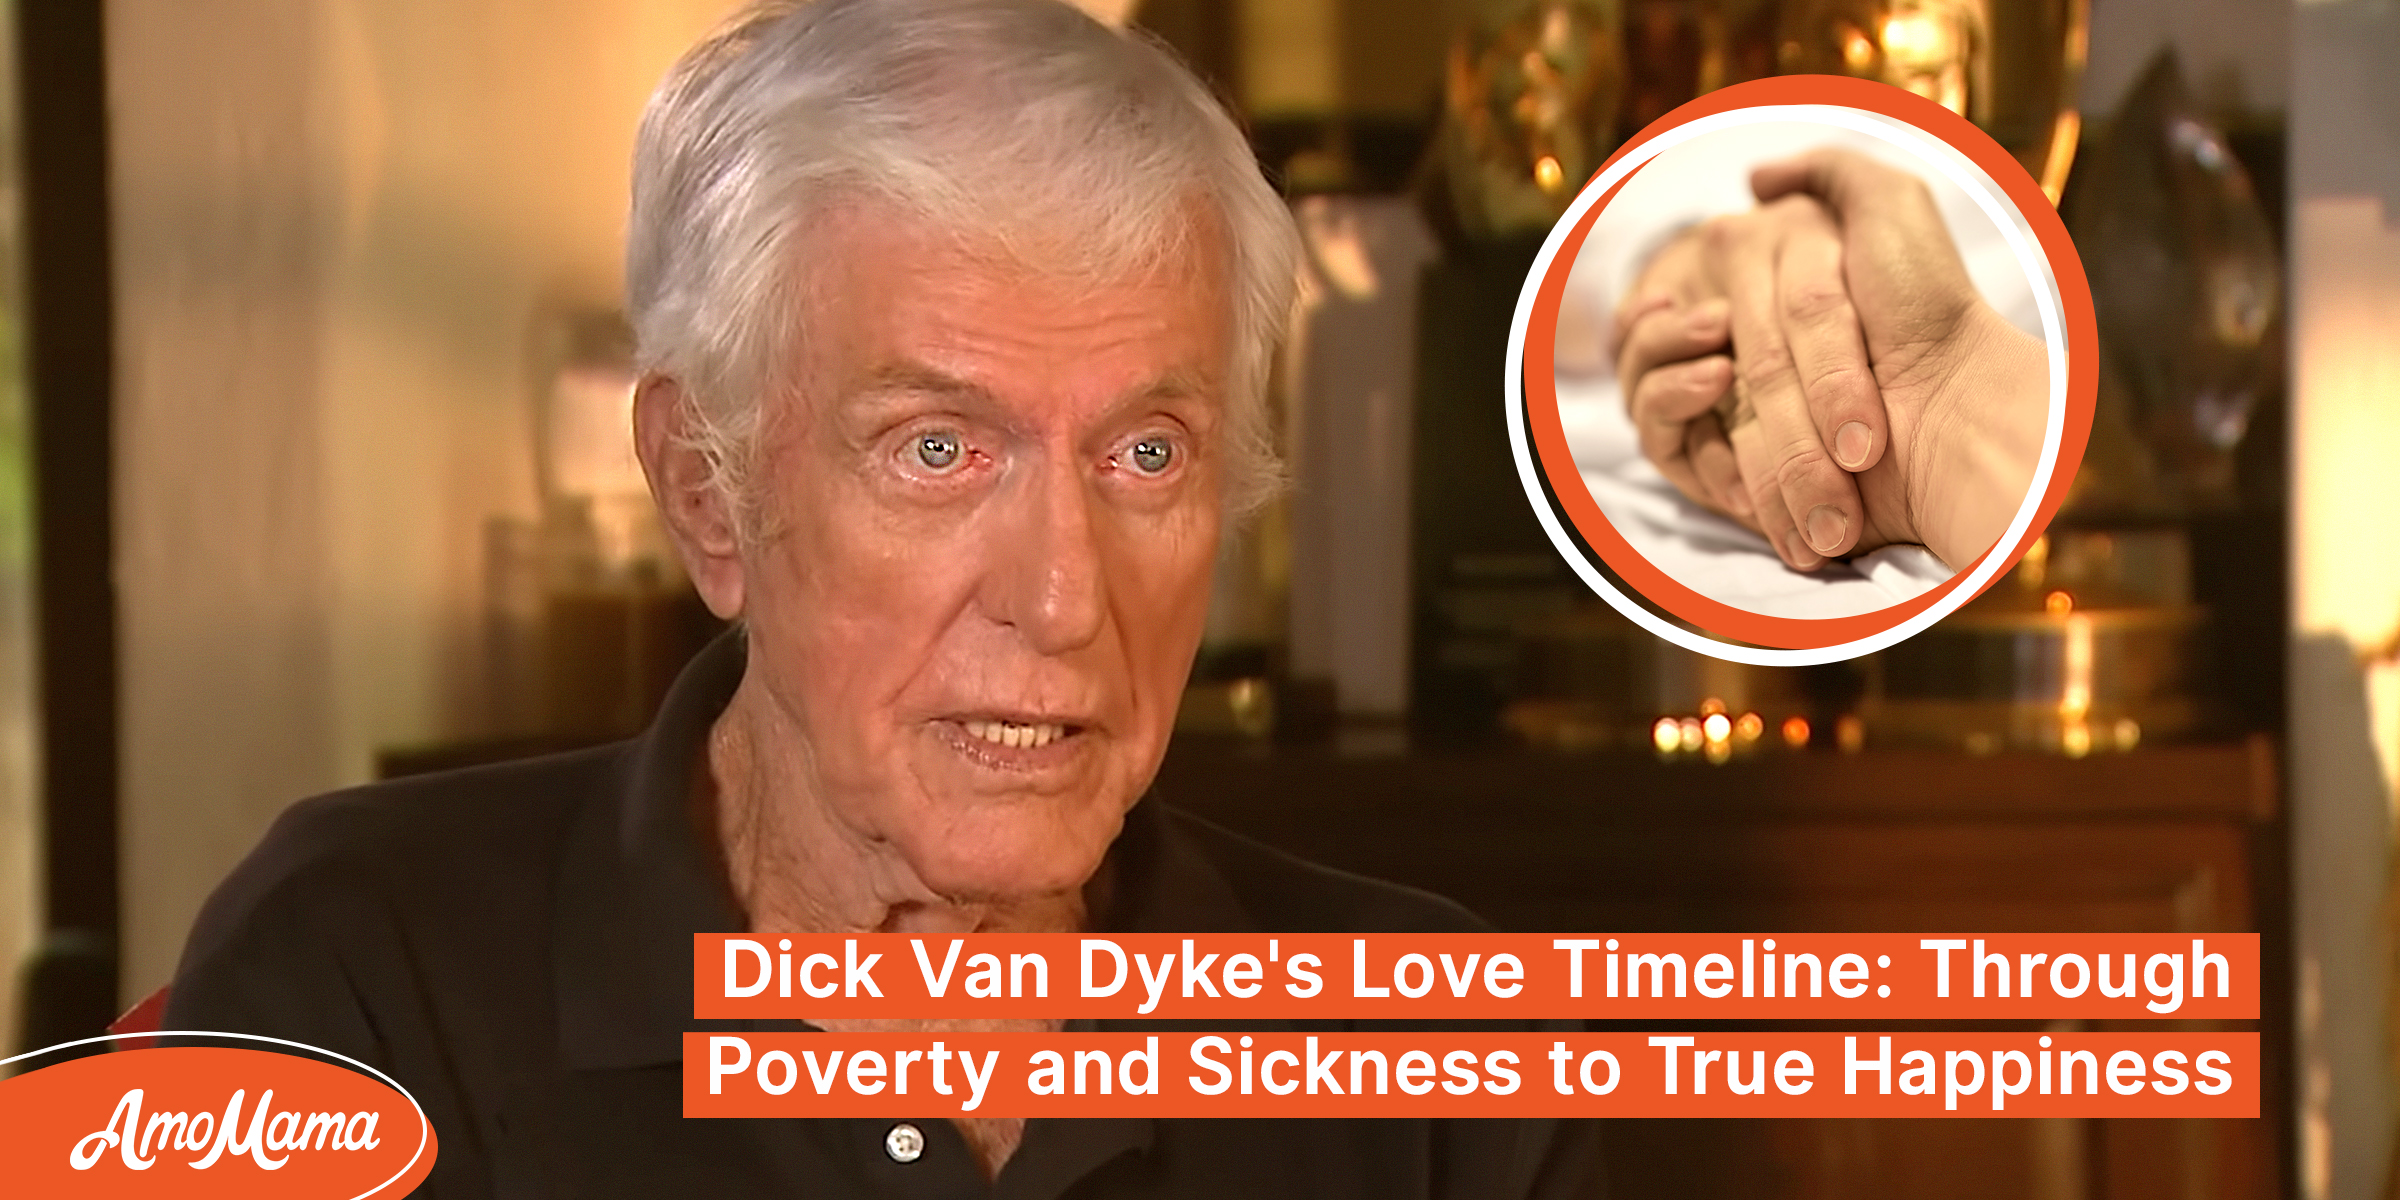 Dick Van Dyke Sang for Days to His Love Who Was in Coma - Timeline of Actor's Biggest Love Stories